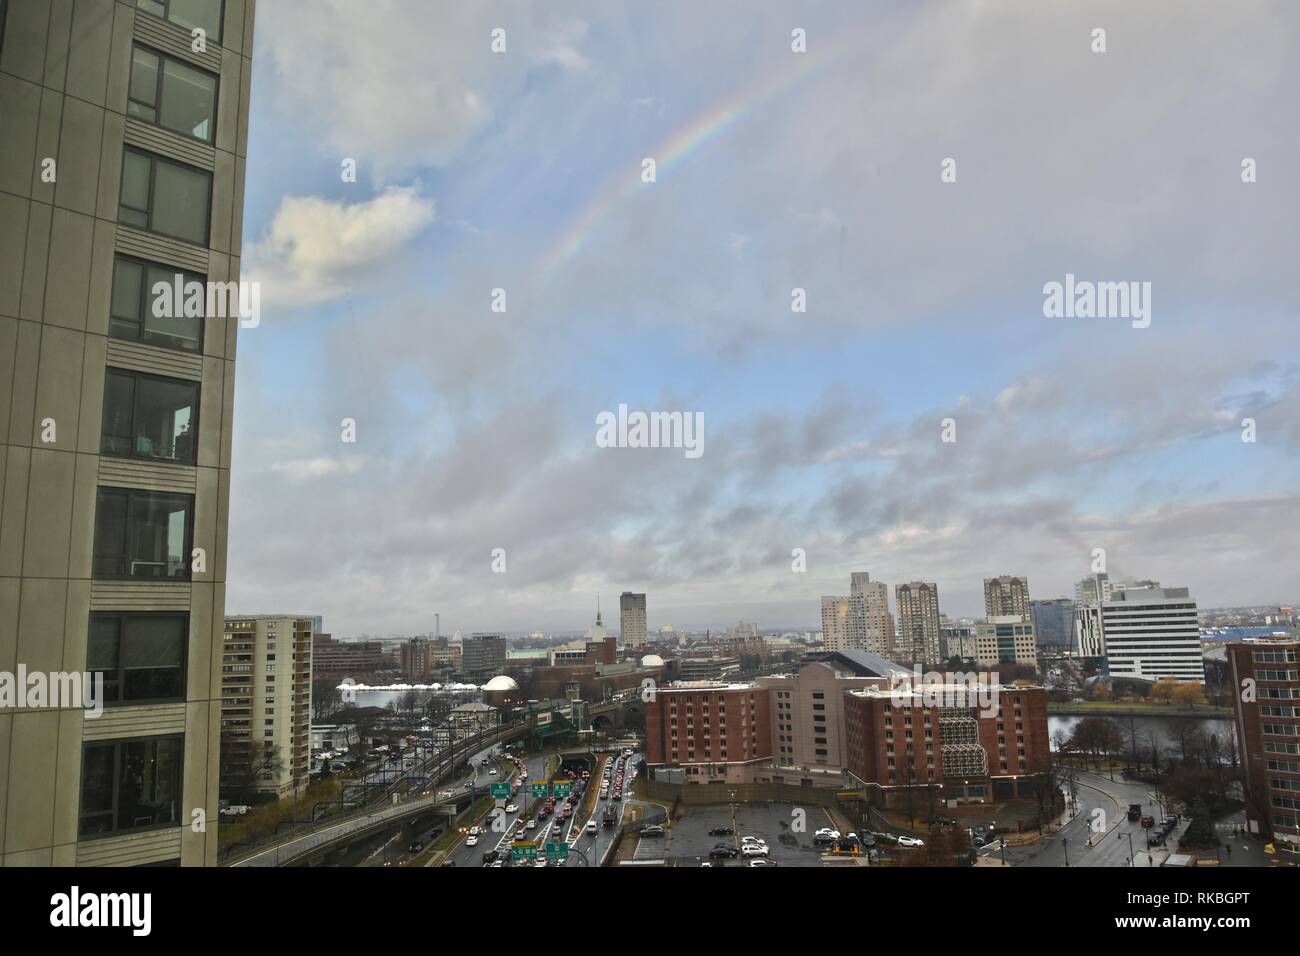 View of the Boston skyline seen from the Avalon North Station roof deck 400 feet above the city streets, Boston, Massachusetts, USA Stock Photo